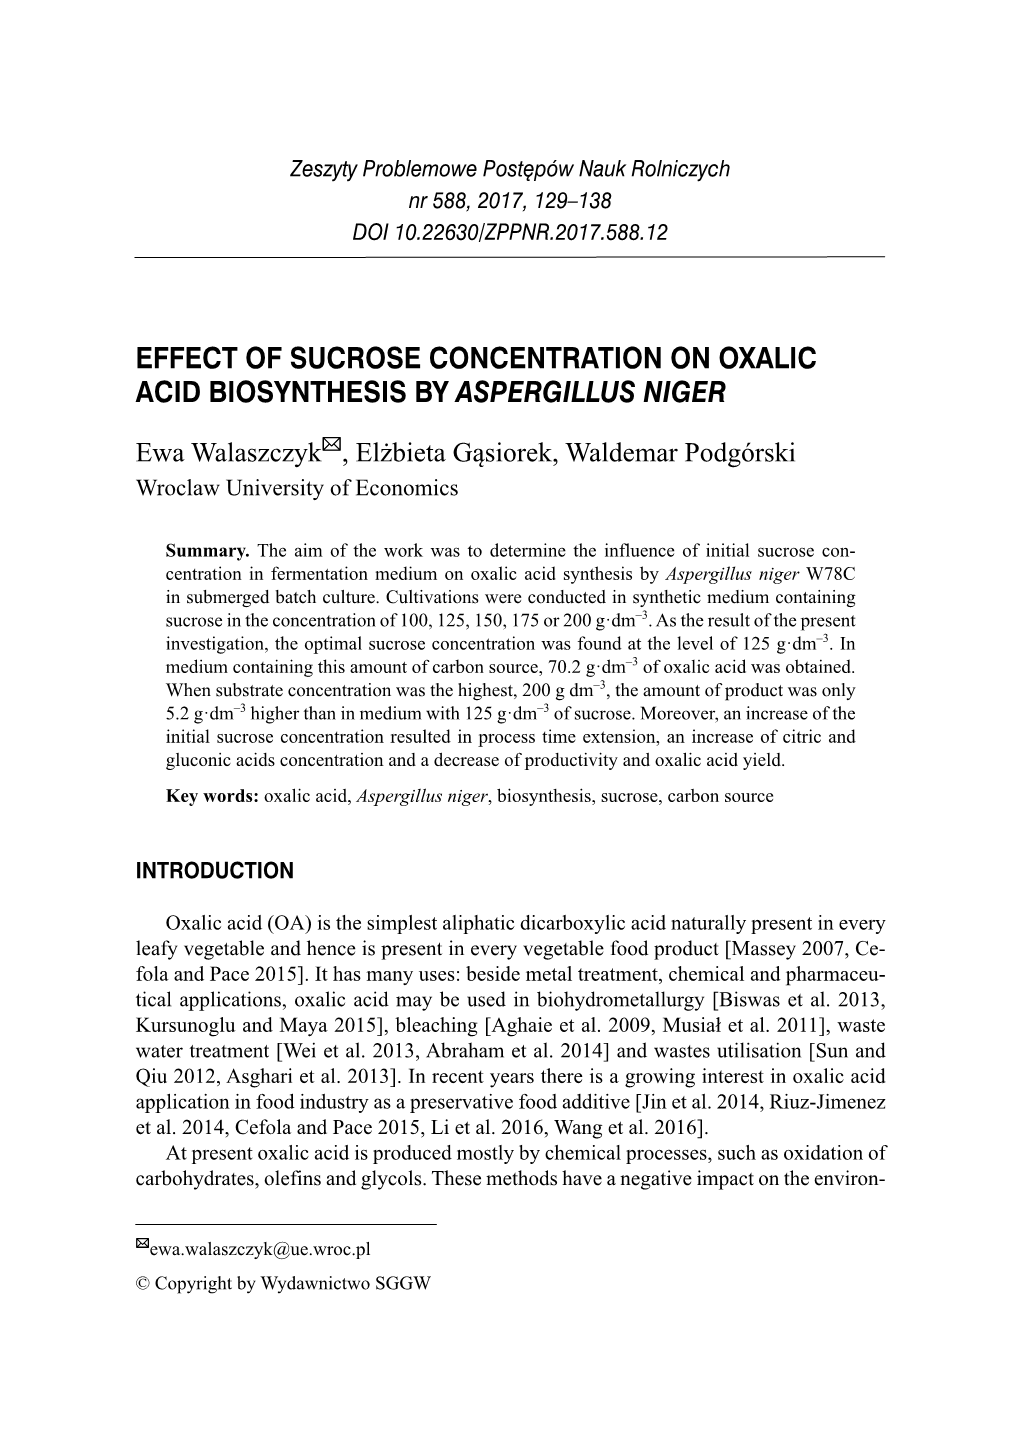 Effect of Sucrose Concentration on Oxalic Acid Biosynthesis by Aspergillus Niger